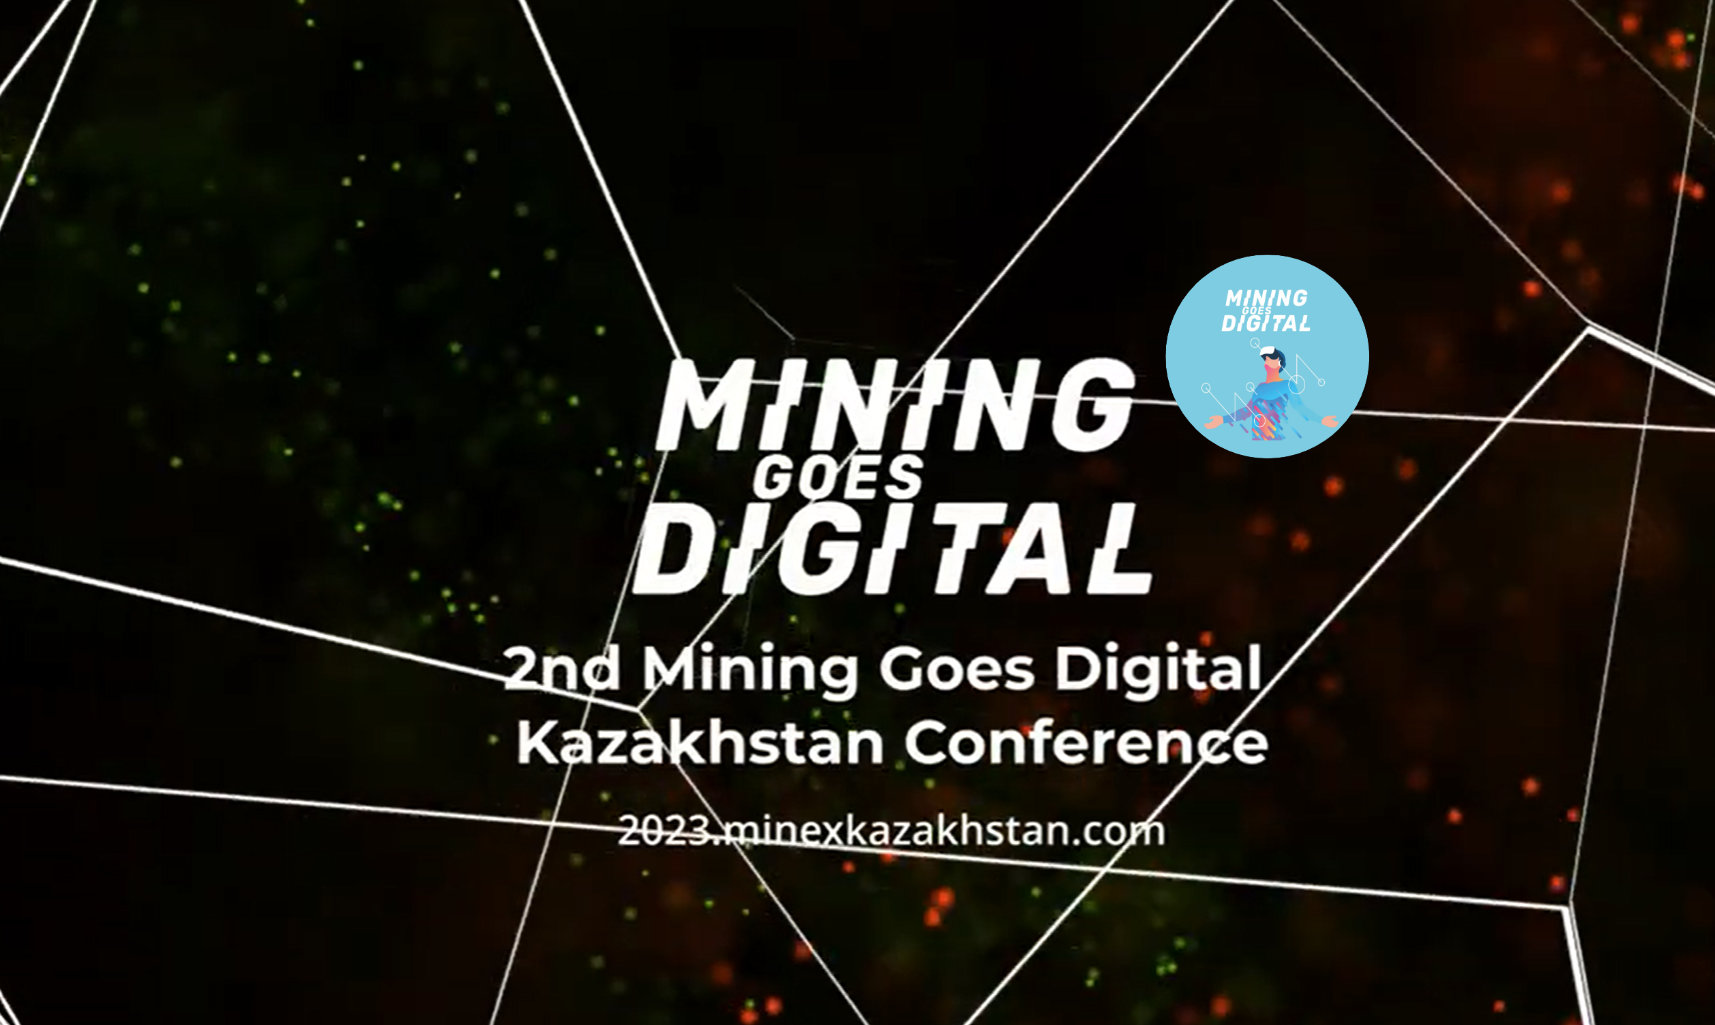 Digital Transformation in Kazakhstan's Mining Industry will be addressed at the 2nd 'Mining Goes Digital Kazakhstan' Conference